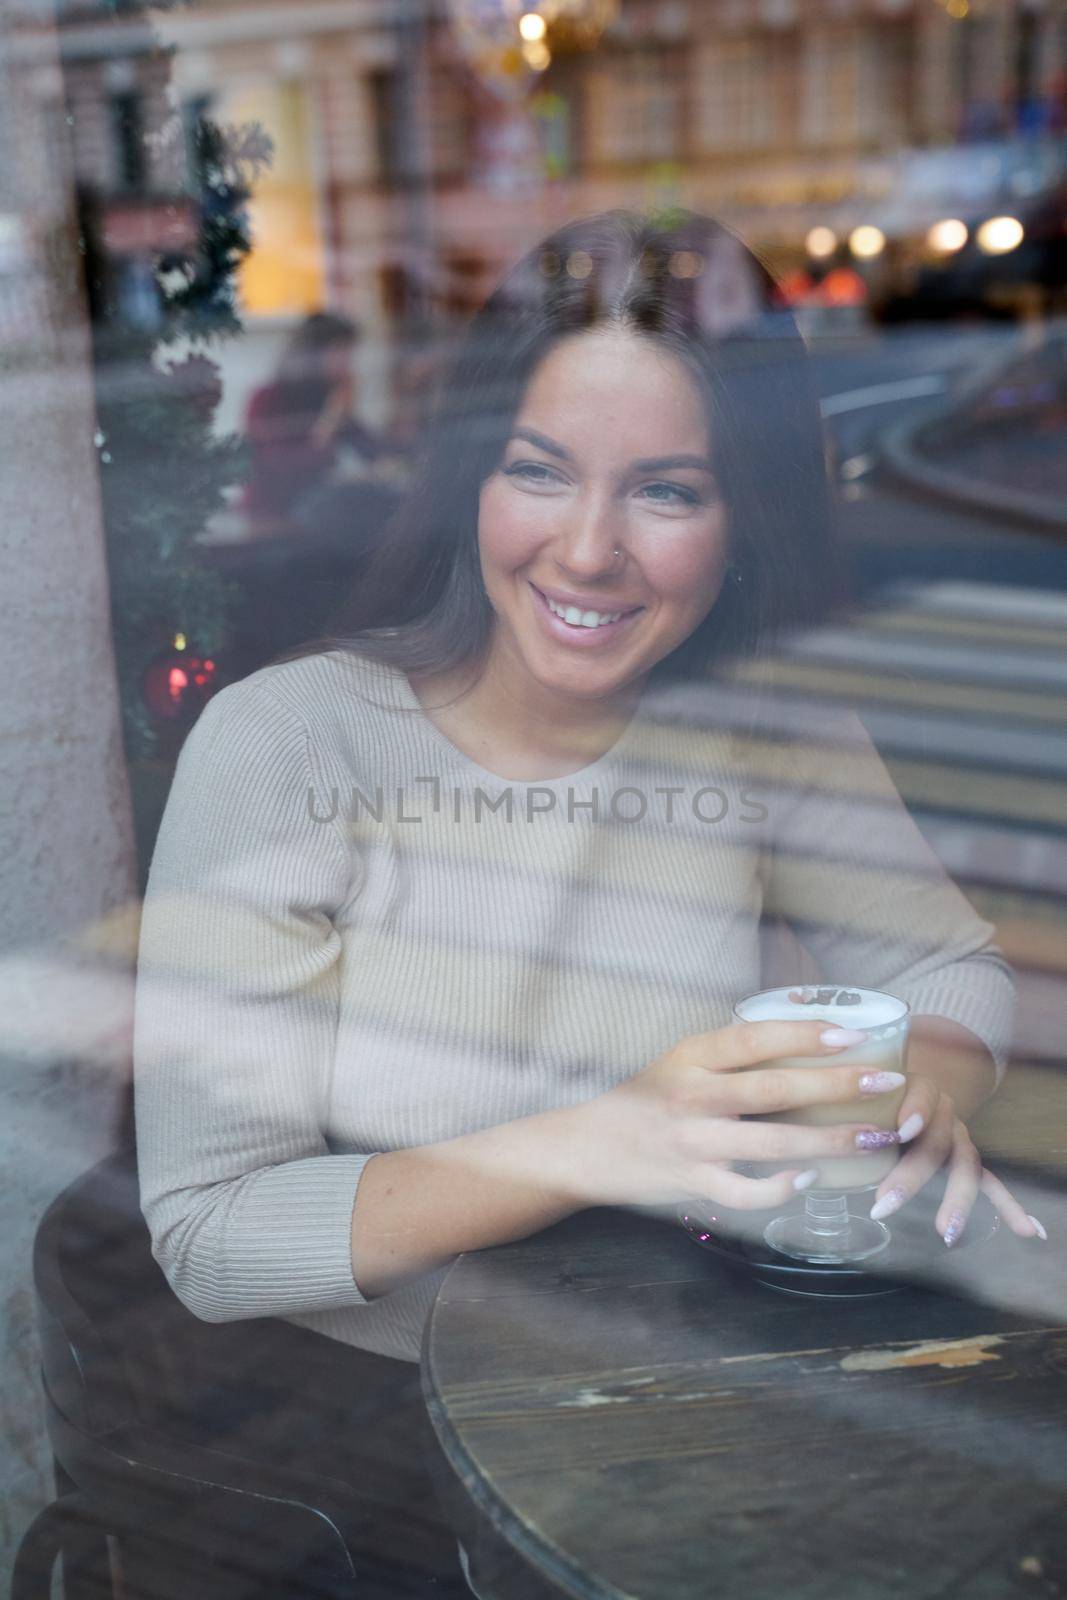 A beautiful girl sits in cafe and looks out window thoughtfully. Reflection of city in window. Smiling brunette woman with long hair drinks cappuccino coffee, vertical